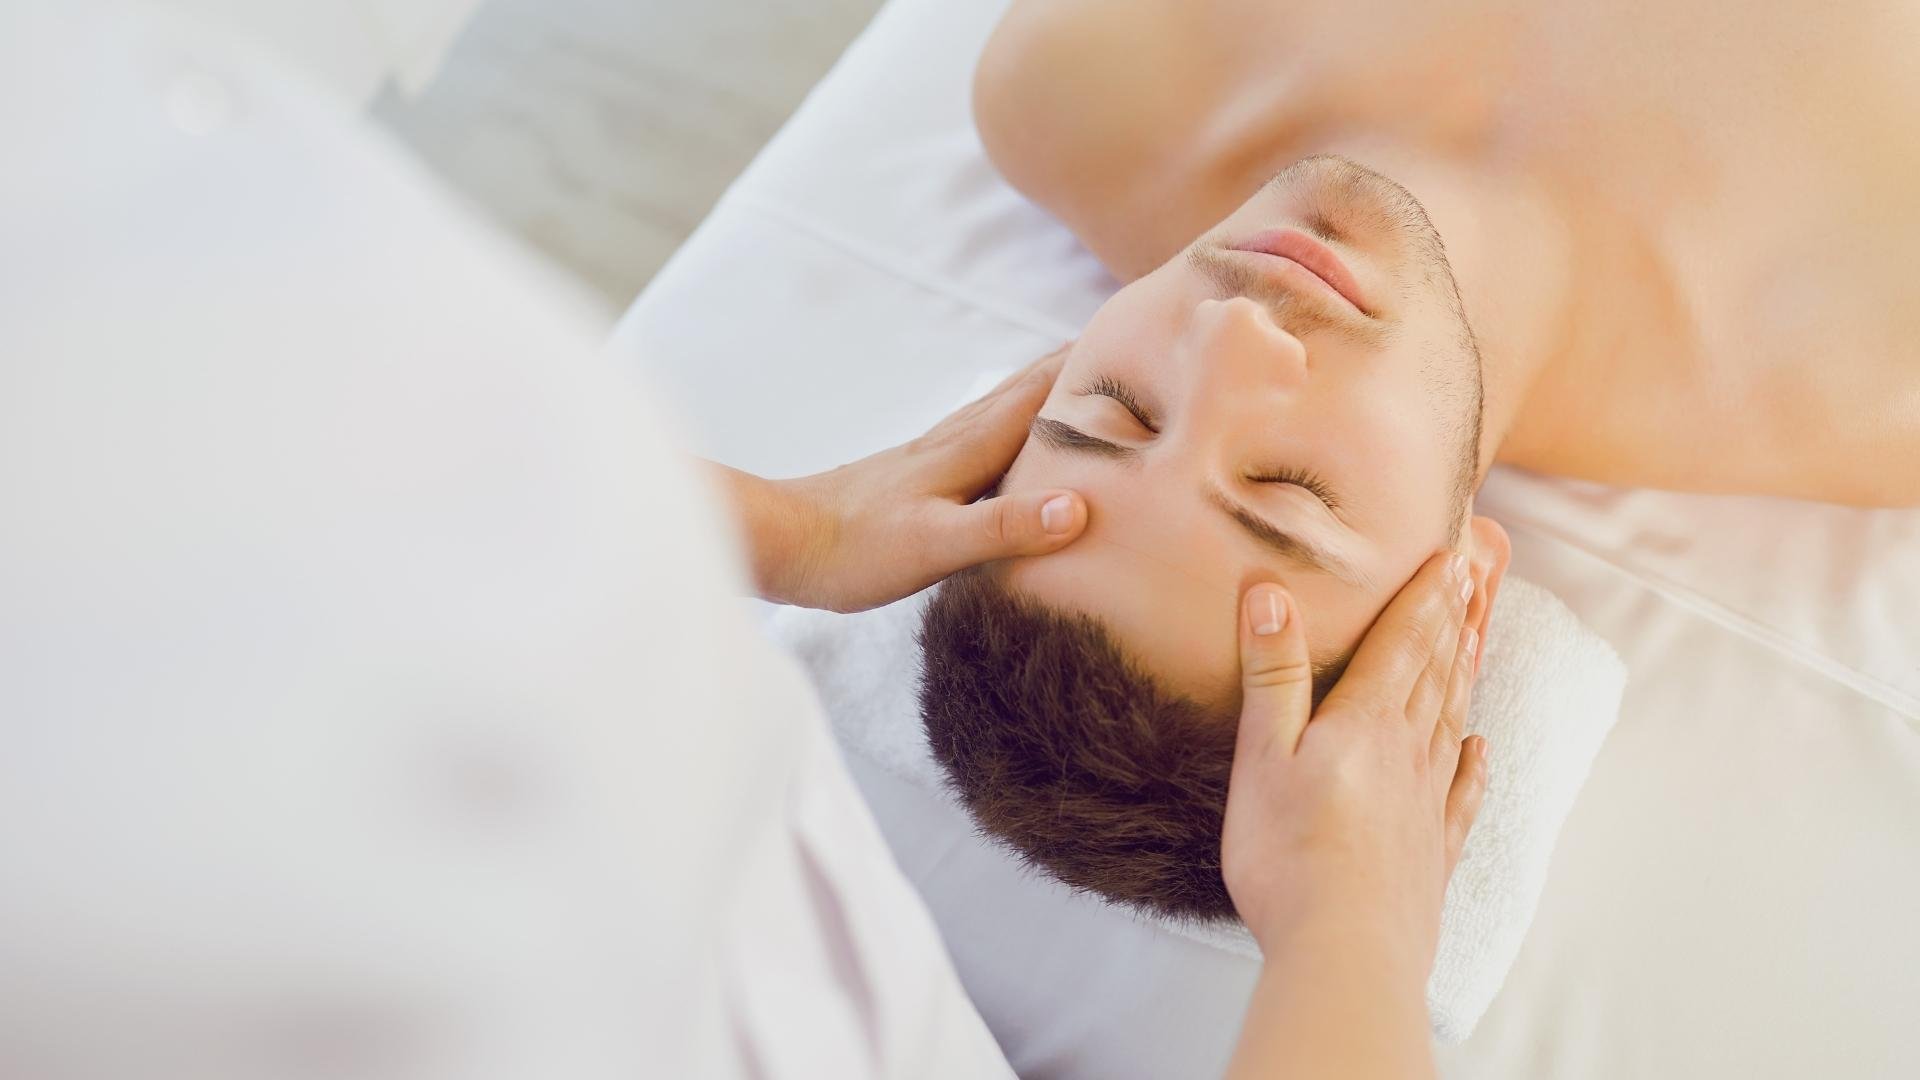 Massage Etiquette for Men: 8 Things to Keep in Mind